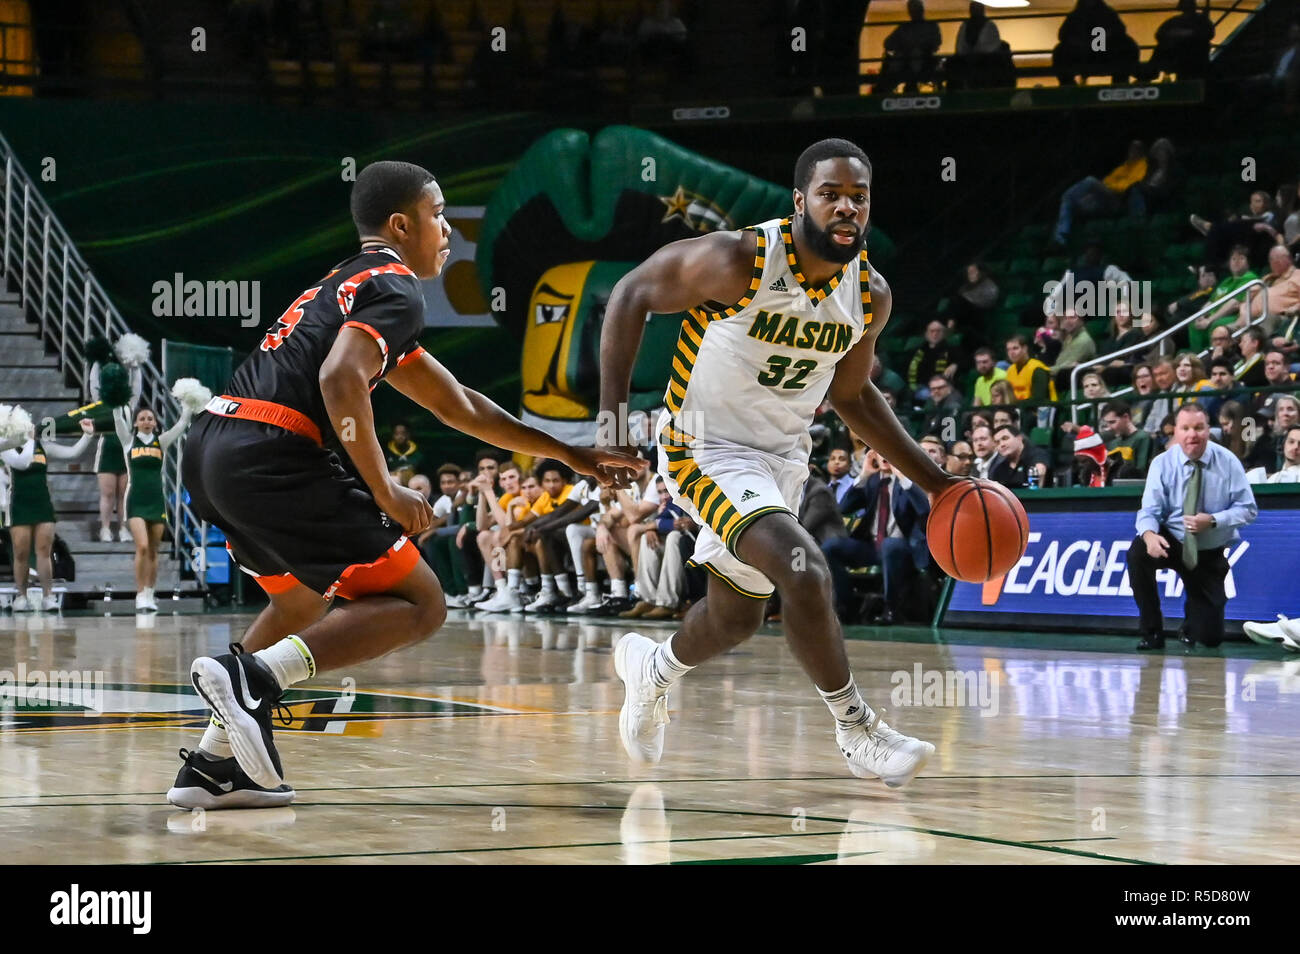 Fairfax, Virginia, USA. 28th Nov, 2018. IAN BOYD (32) charges down the court against SHERWYN DEVONISH (5) during the game held at Eaglebank Arena in Fairfax, Virginia. Credit: Amy Sanderson/ZUMA Wire/Alamy Live News Stock Photo